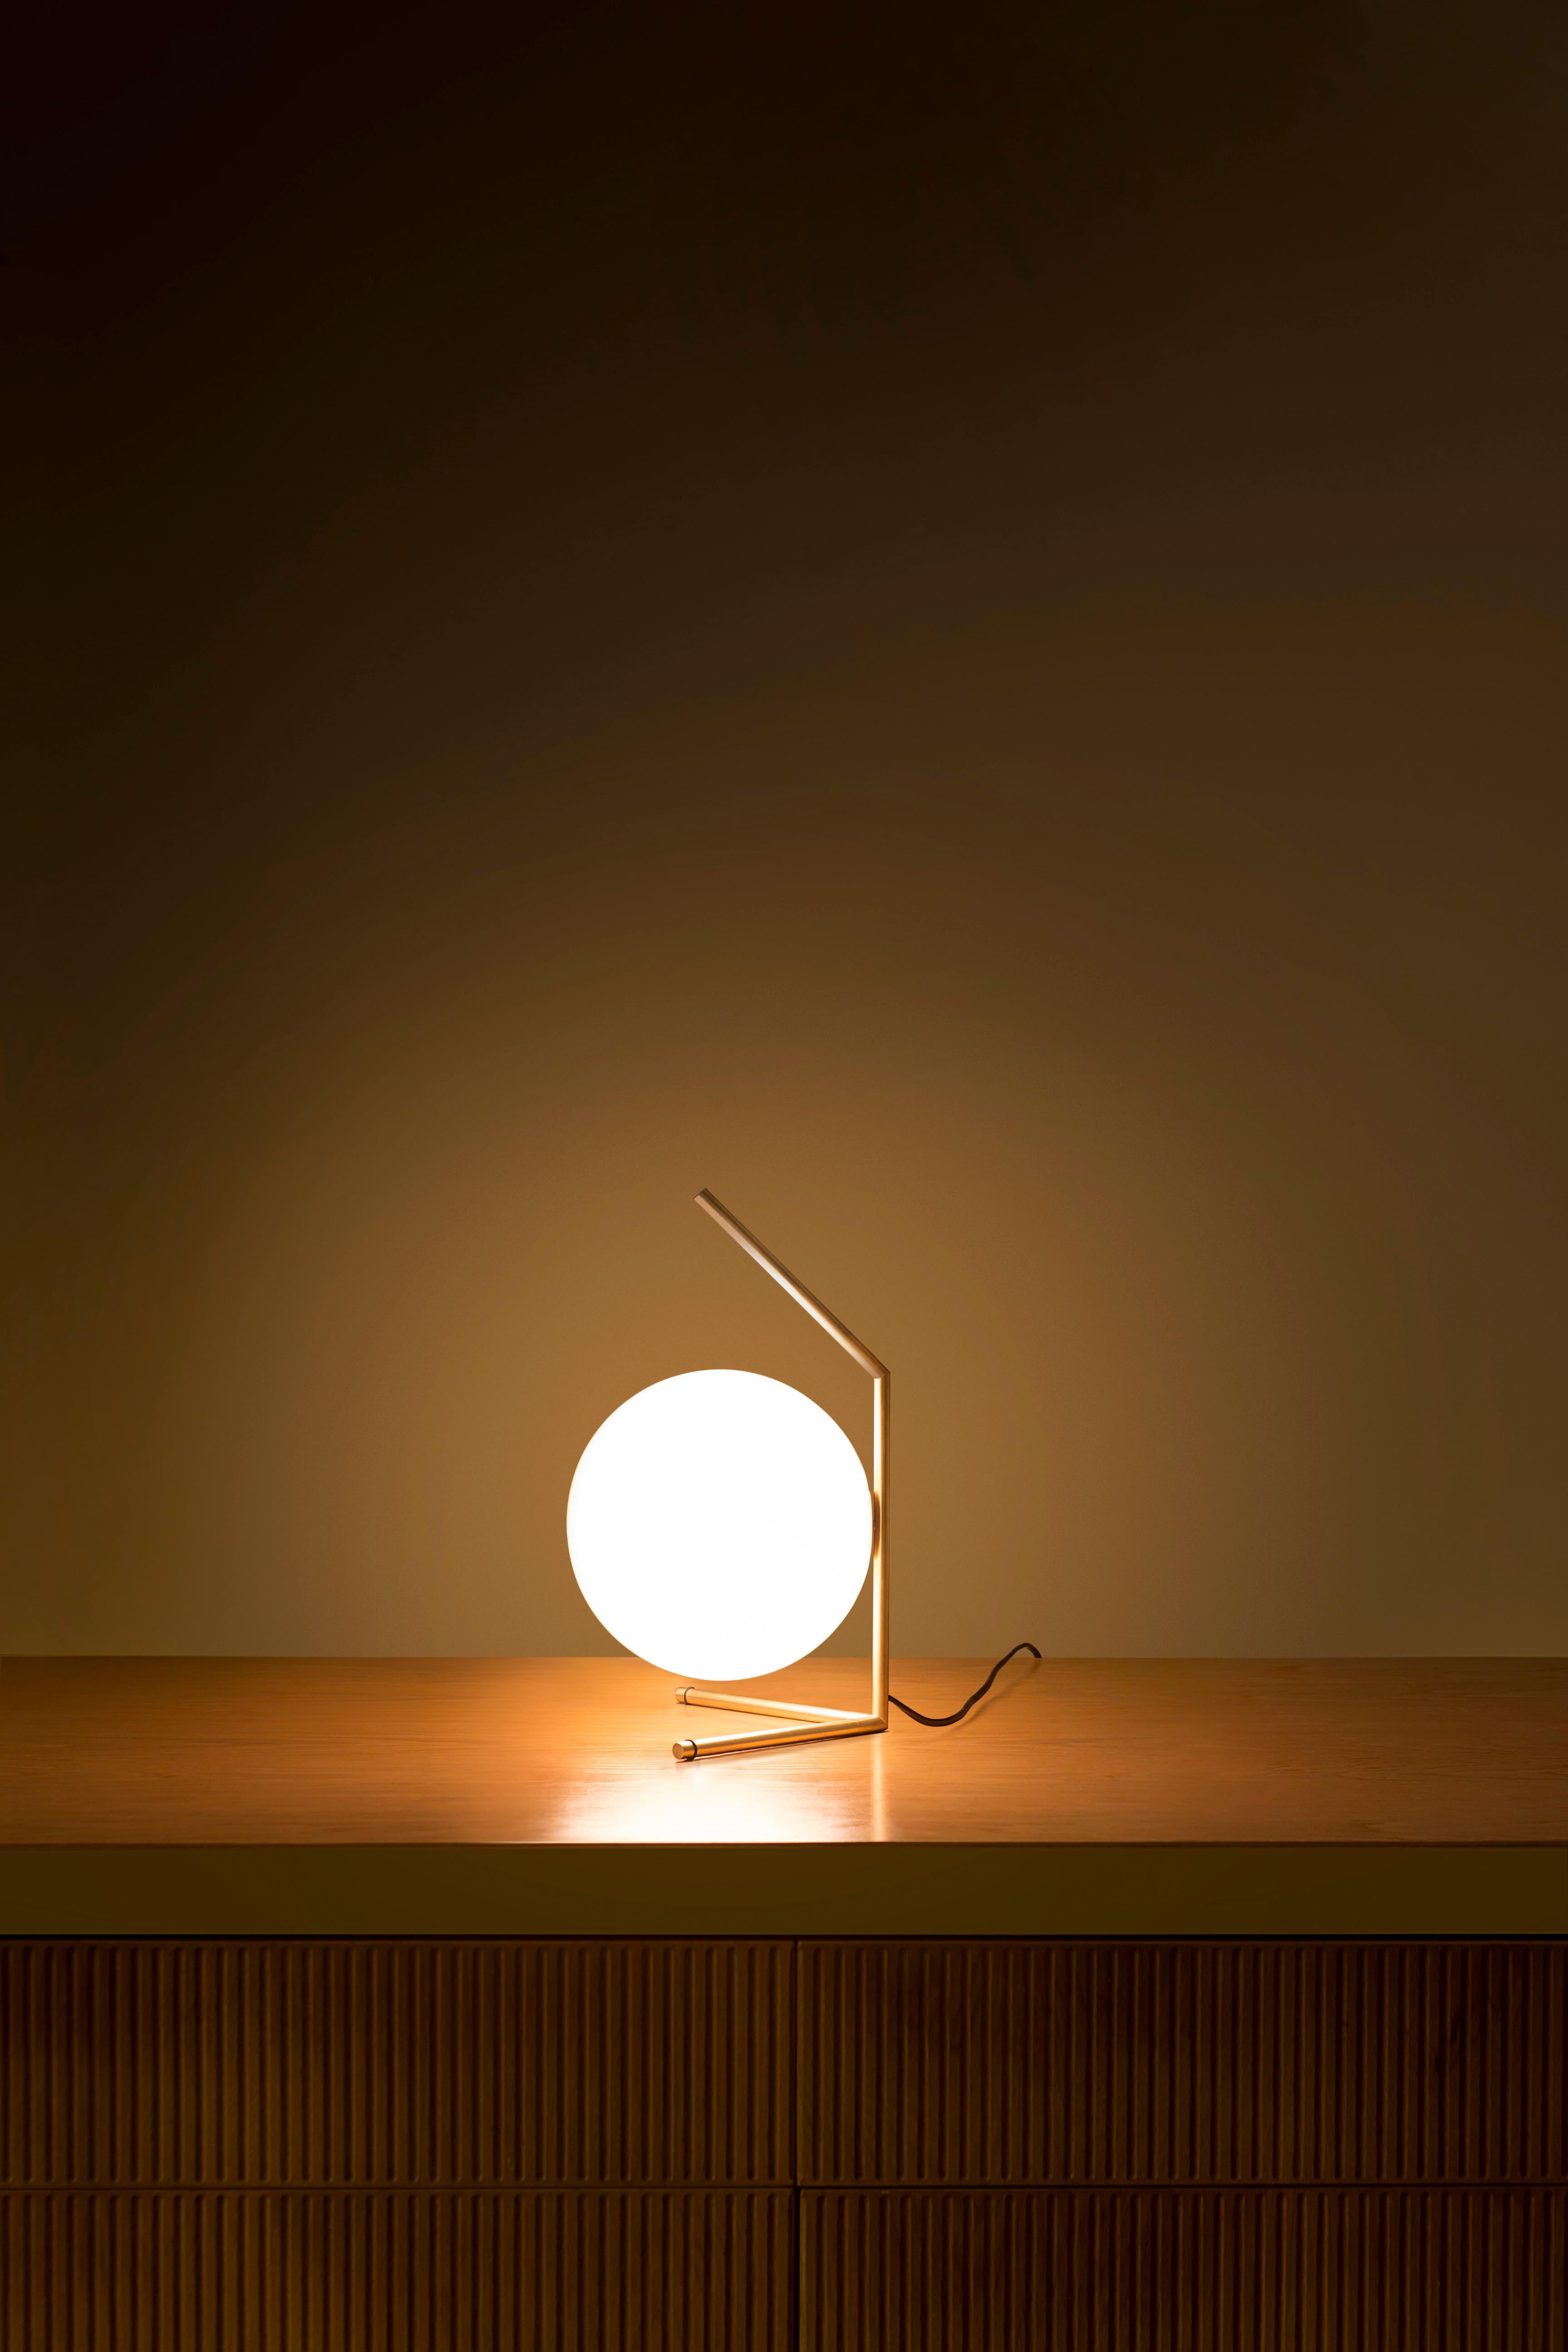 FLOS IC Lights T1 Low Table Lamp in Brass by Michael Anastassiades

Like the other pieces in his IC Light Series, the IC Lights T balances designer Michael Anastassiades’ love of industrial simplicity with intricate symbolism. It provides diffused